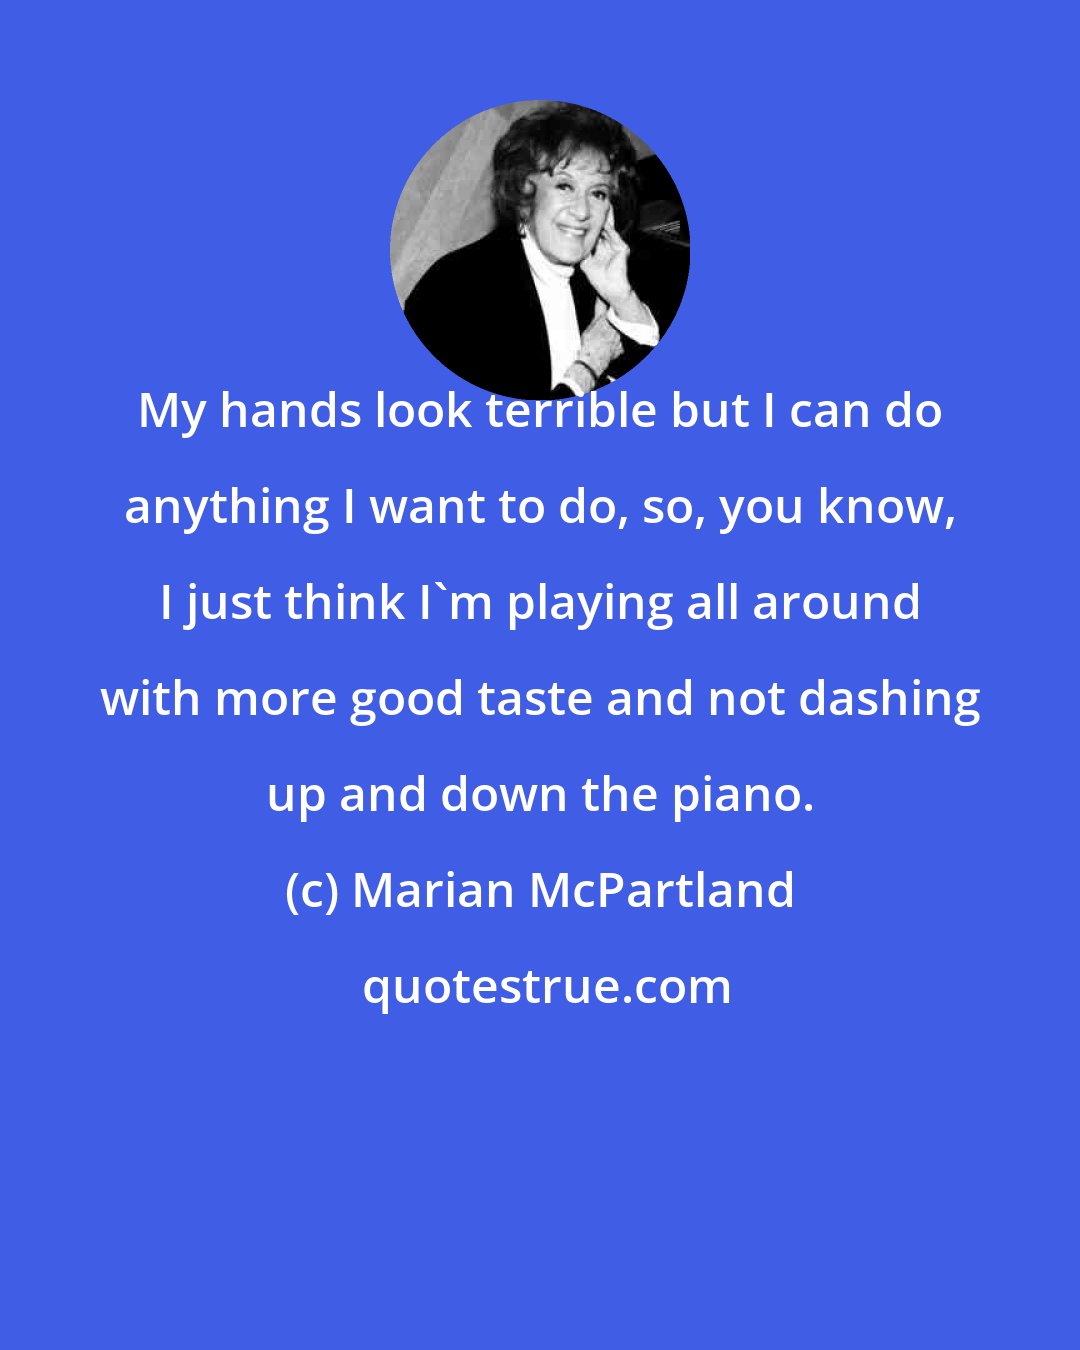 Marian McPartland: My hands look terrible but I can do anything I want to do, so, you know, I just think I'm playing all around with more good taste and not dashing up and down the piano.